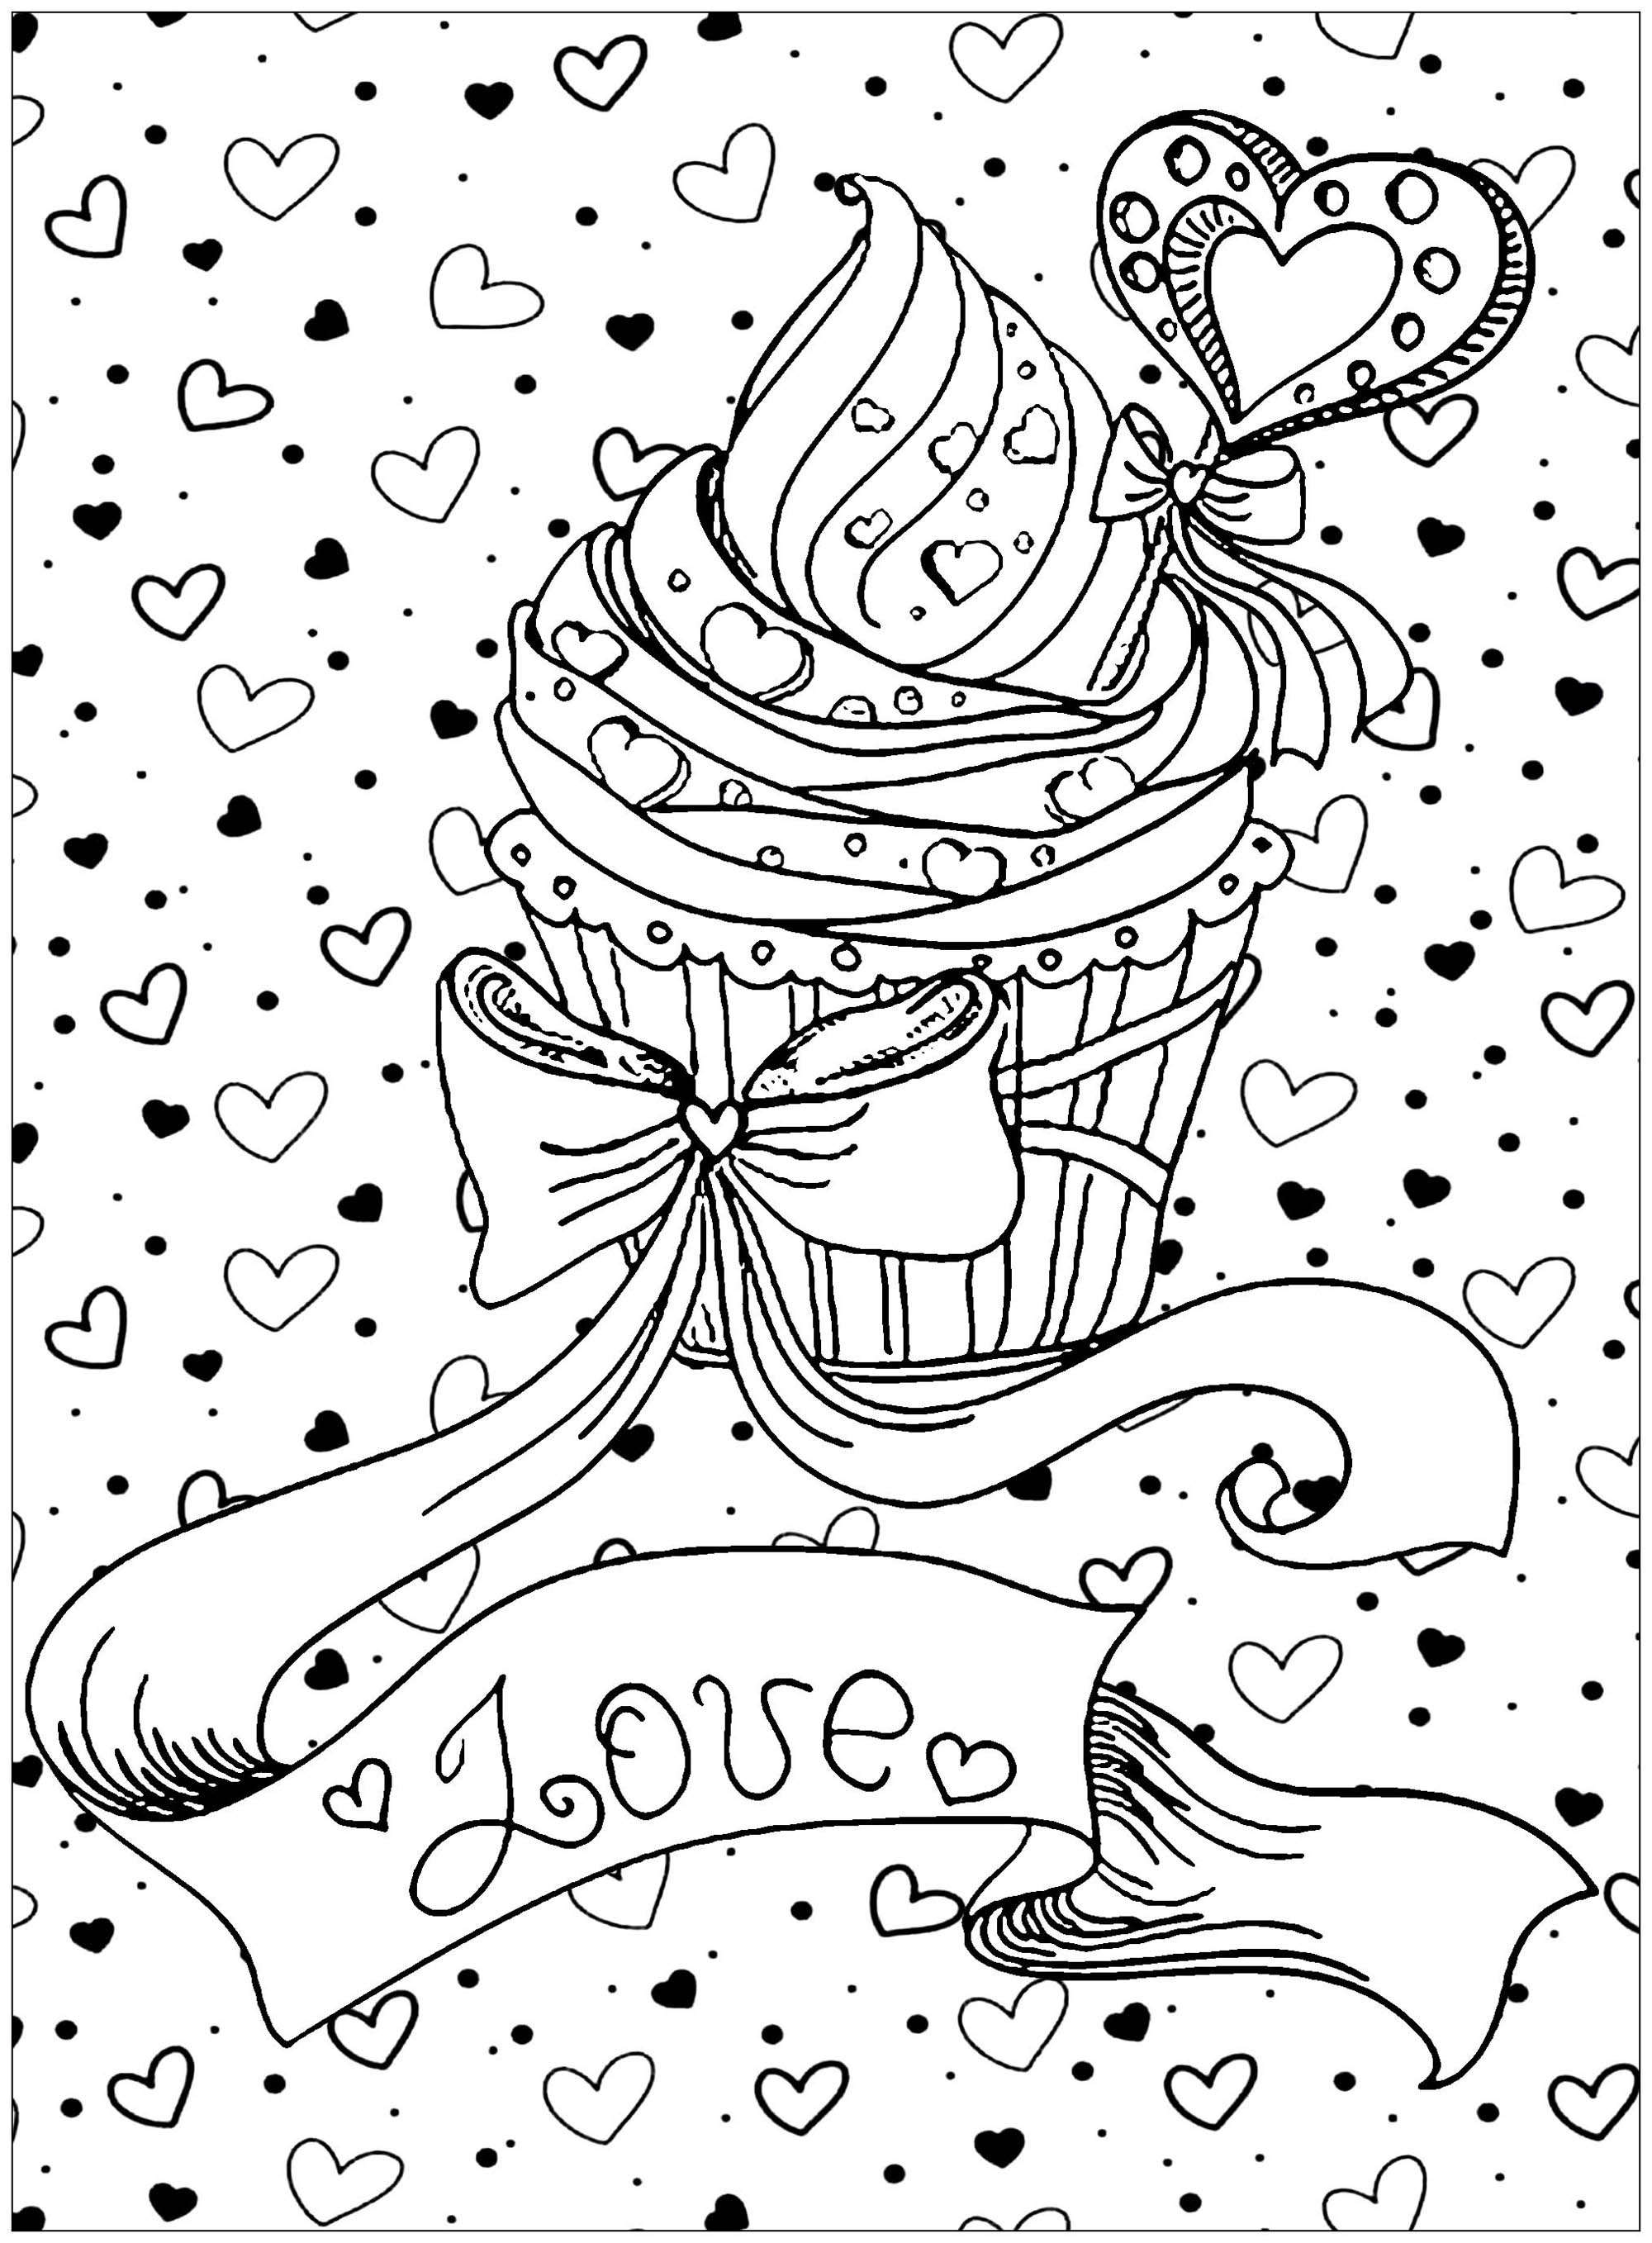 image=cup cakes coloriage cupcake love 1